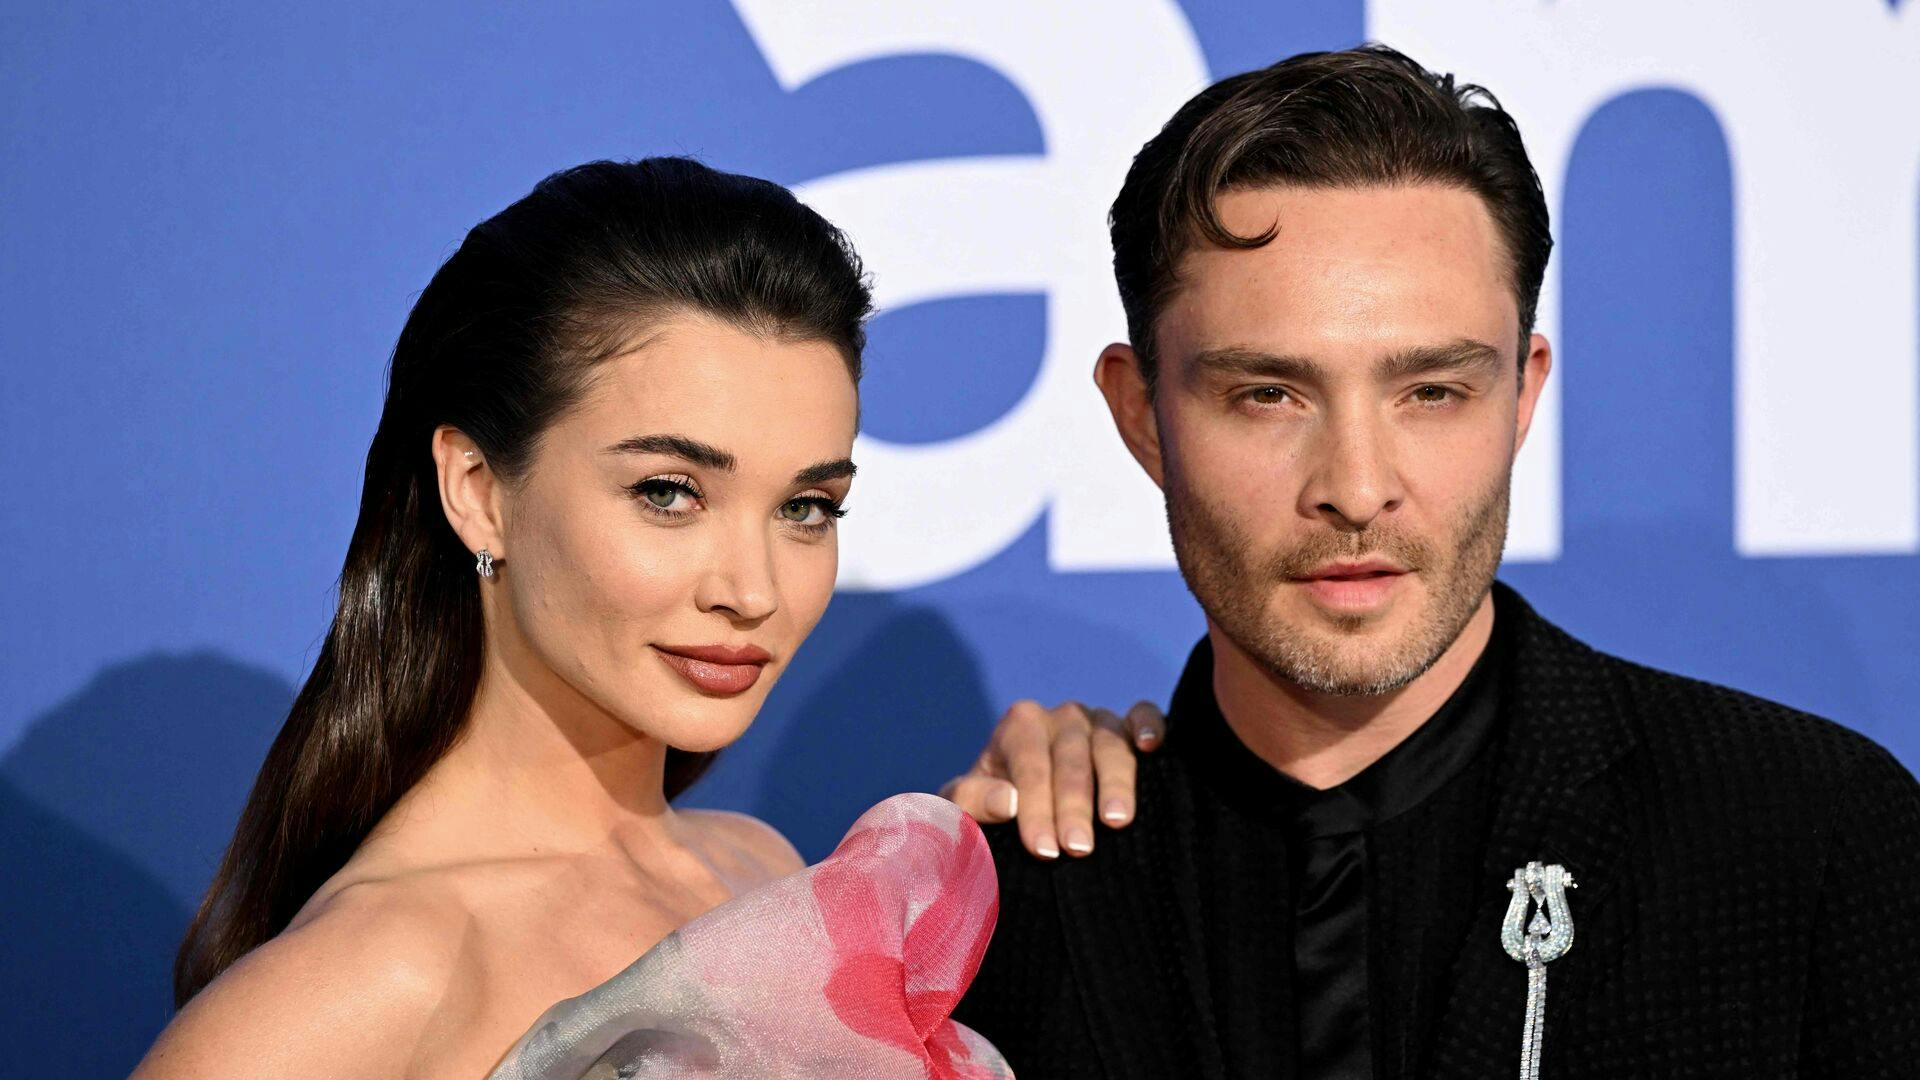 British actress Amy Jackson (L) and British actor Ed Westwick arrive to attend the annual amfAR Cinema Against AIDS Cannes Gala at the Hotel du Cap-Eden-Roc in Cap dAntibes, southern France, on the sidelines of the 76th Cannes Film Festival, on May 25, 2023. (Photo by Stefano Rellandini / AFP)